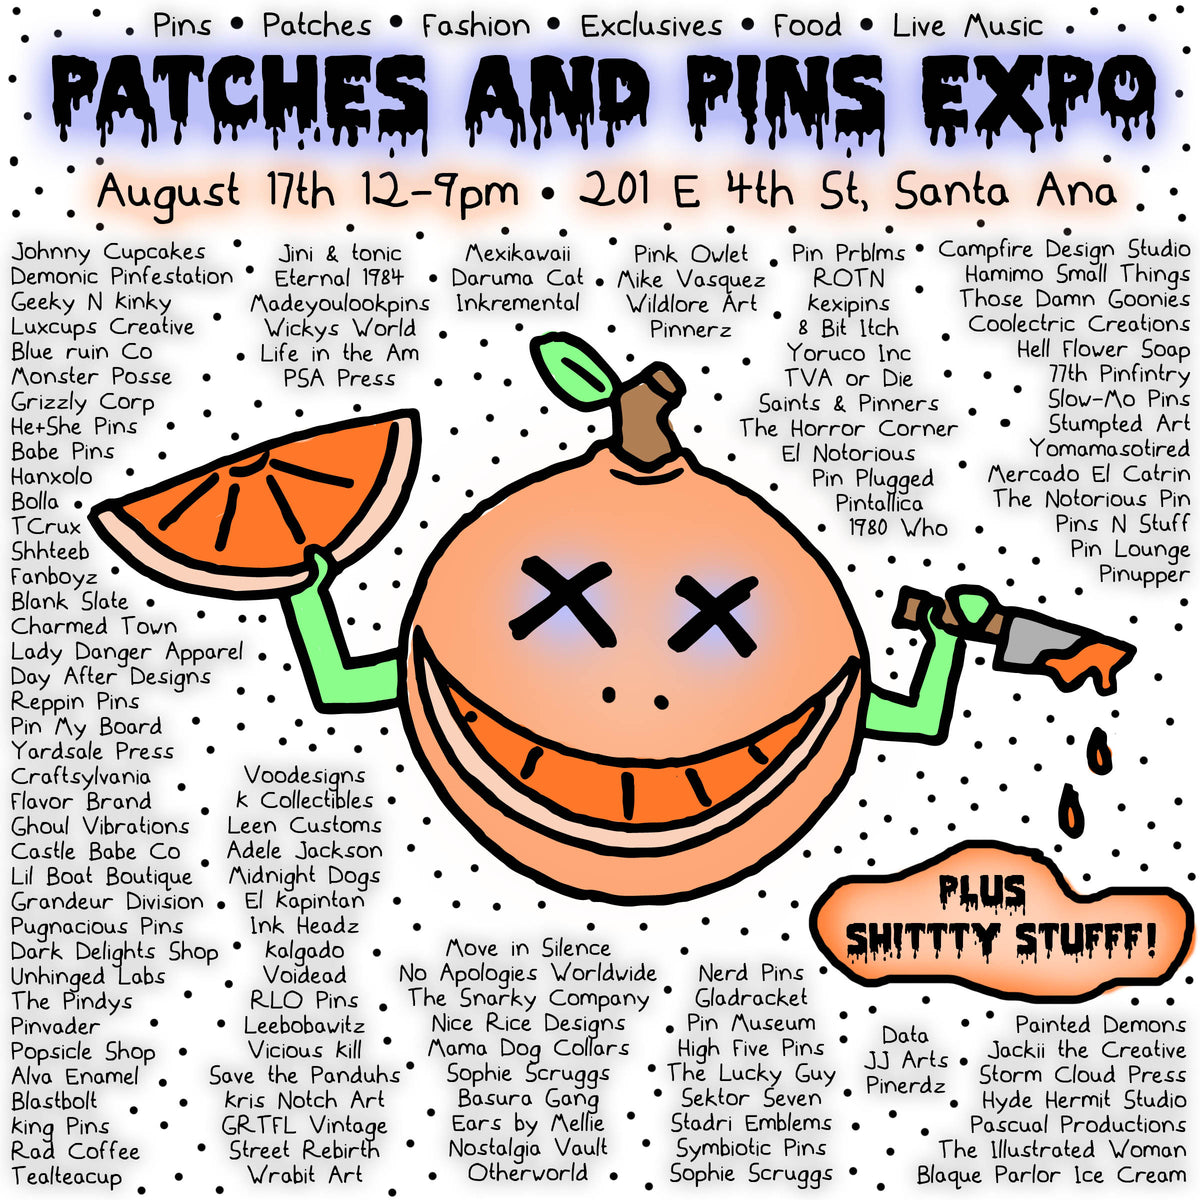 AUGUST 17, 2019 // PATCHES & PINS EXPO